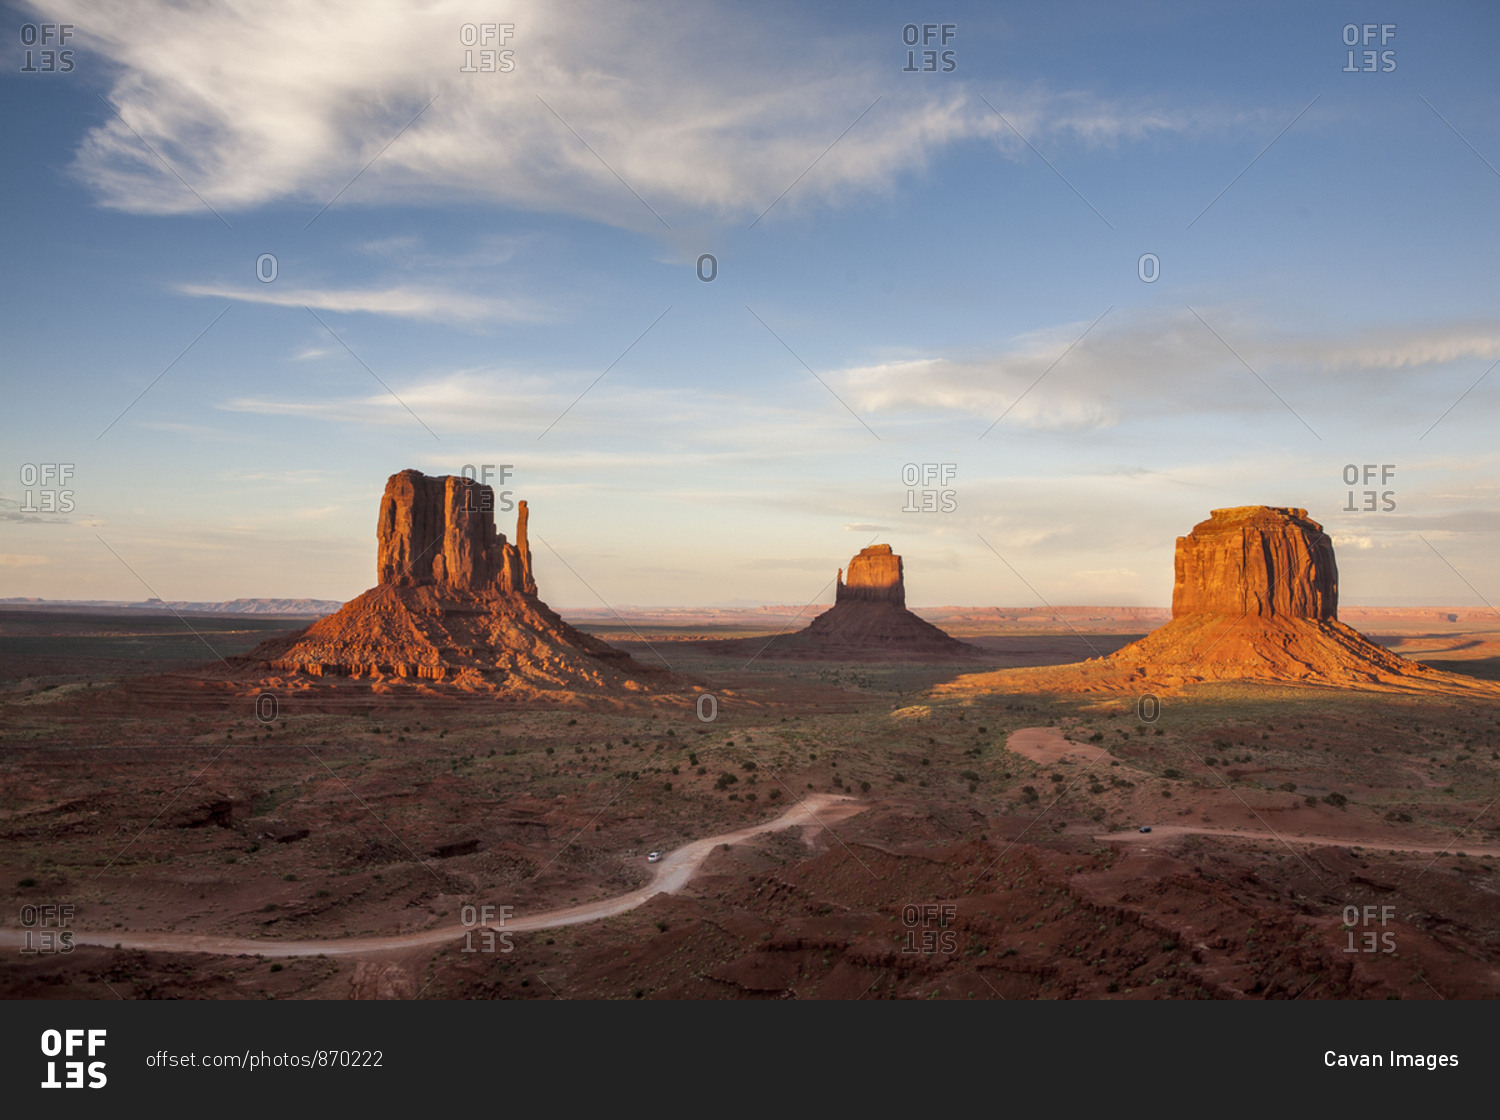 Sunset light hits the iconic rock formations in Monument Valley, AZ